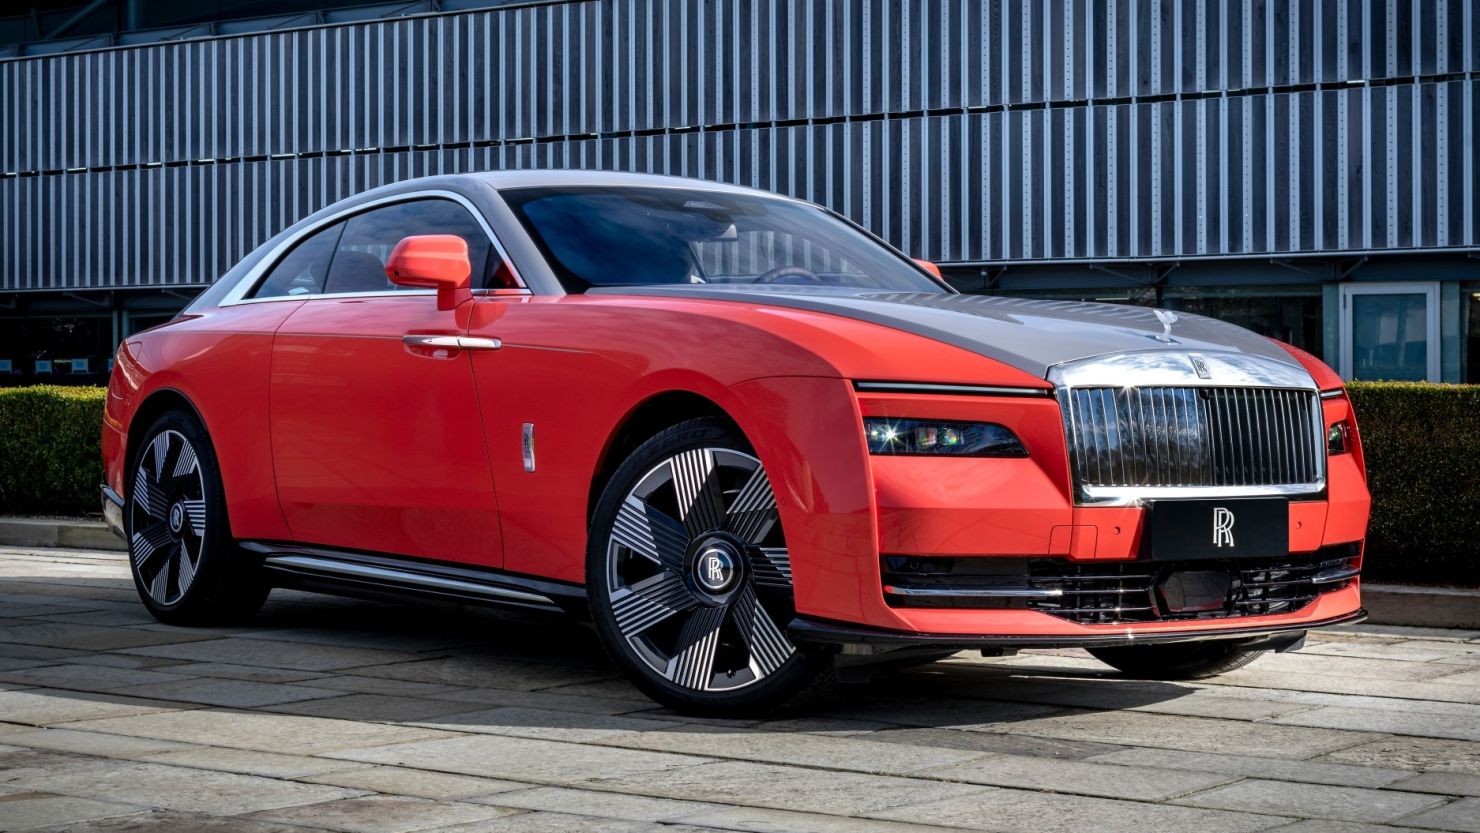 Rolls-Royce is getting more requests for custom paint and other features, such as on this electric Spectre model.